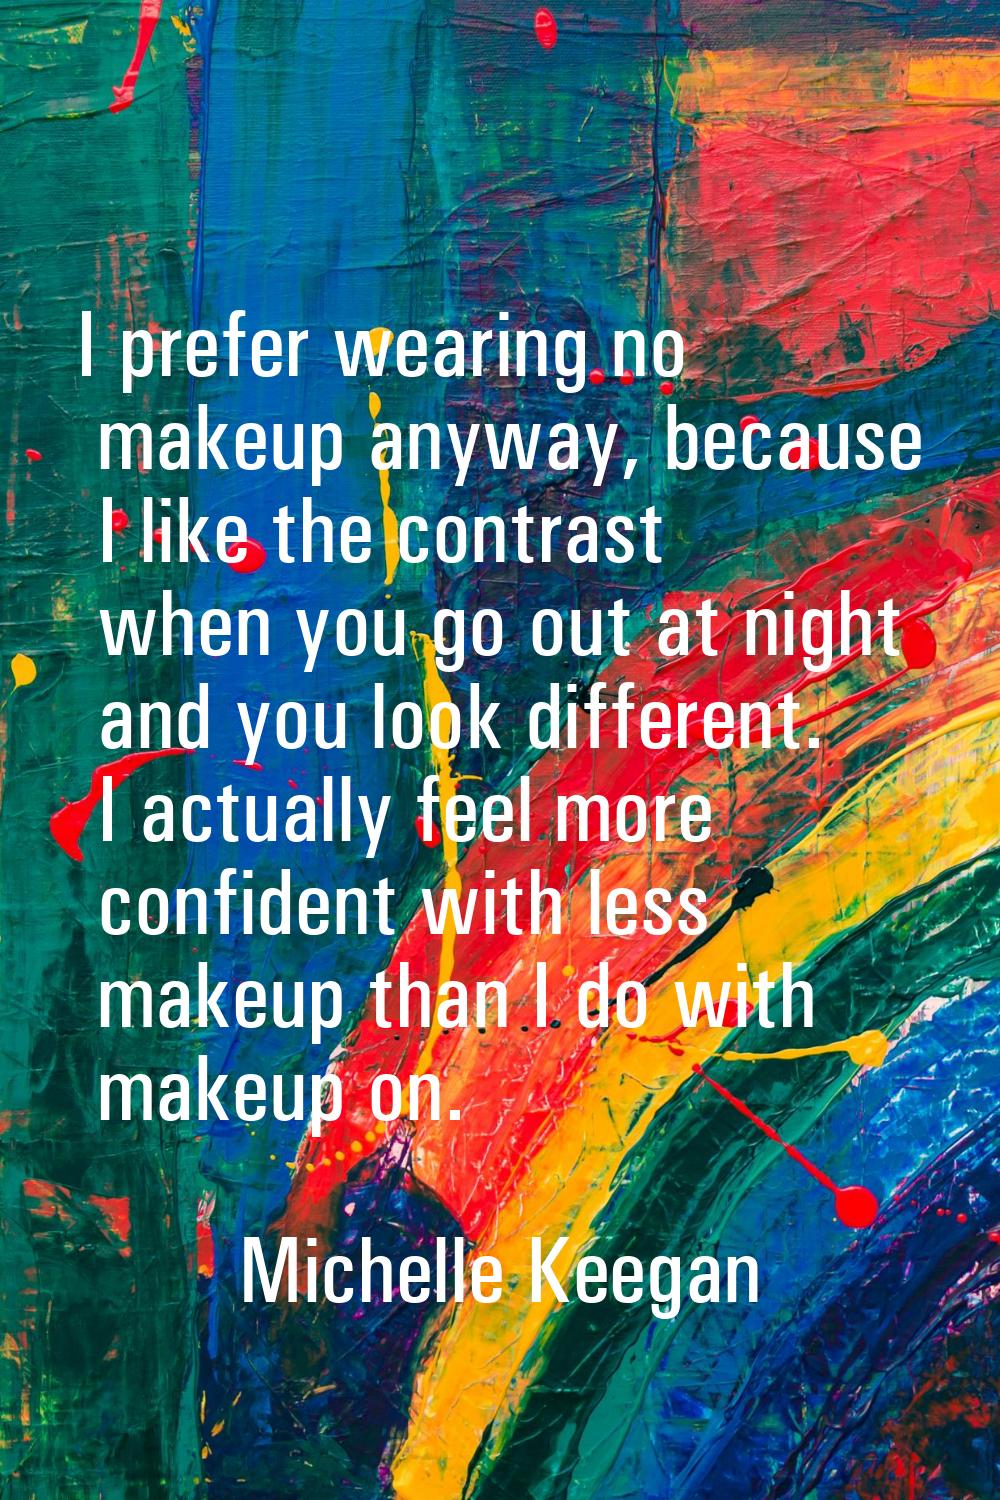 I prefer wearing no makeup anyway, because I like the contrast when you go out at night and you loo